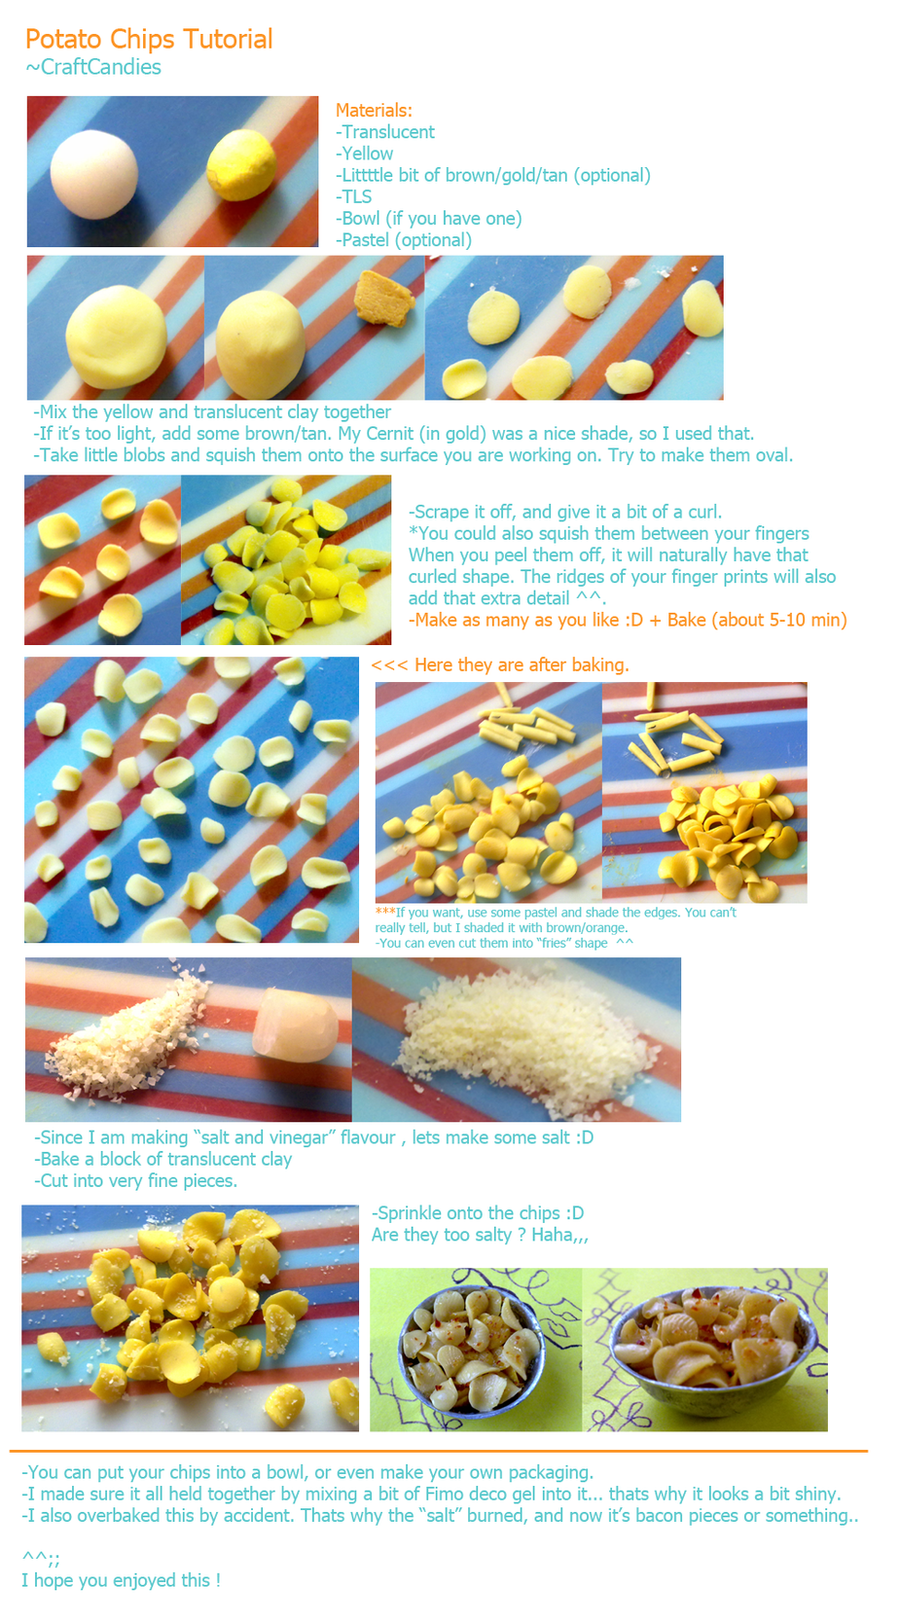 polymer_clay___potato_chips_tutorial_by_craftcandies-d4yl1jm.png